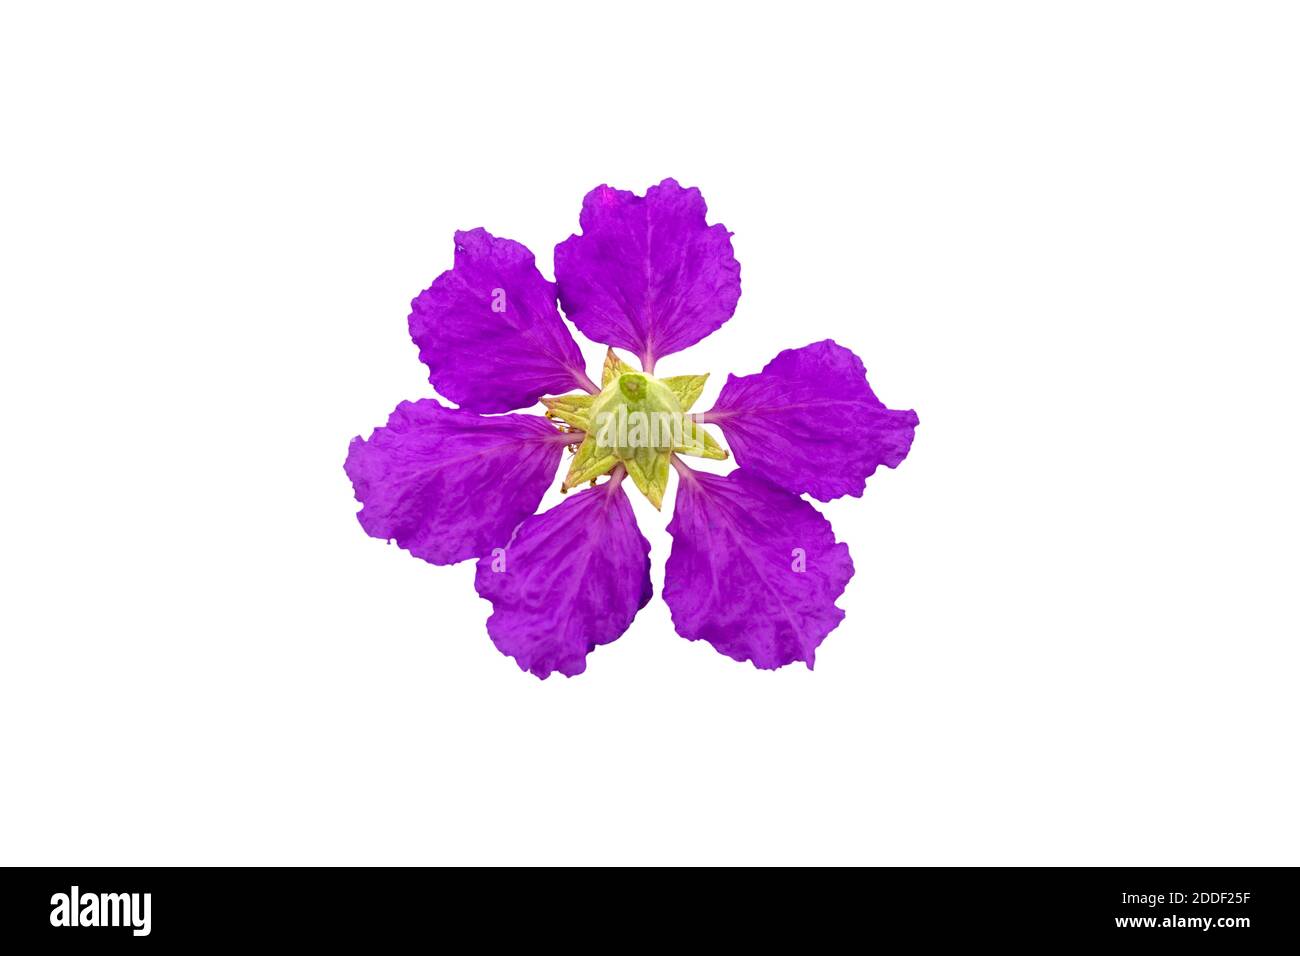 Queens crape myrtle flowers or Queen's flower, Lagerstroemia inermis Pers,Pride of India, Jarul isolated on white background.Saved with clipping path. Stock Photo